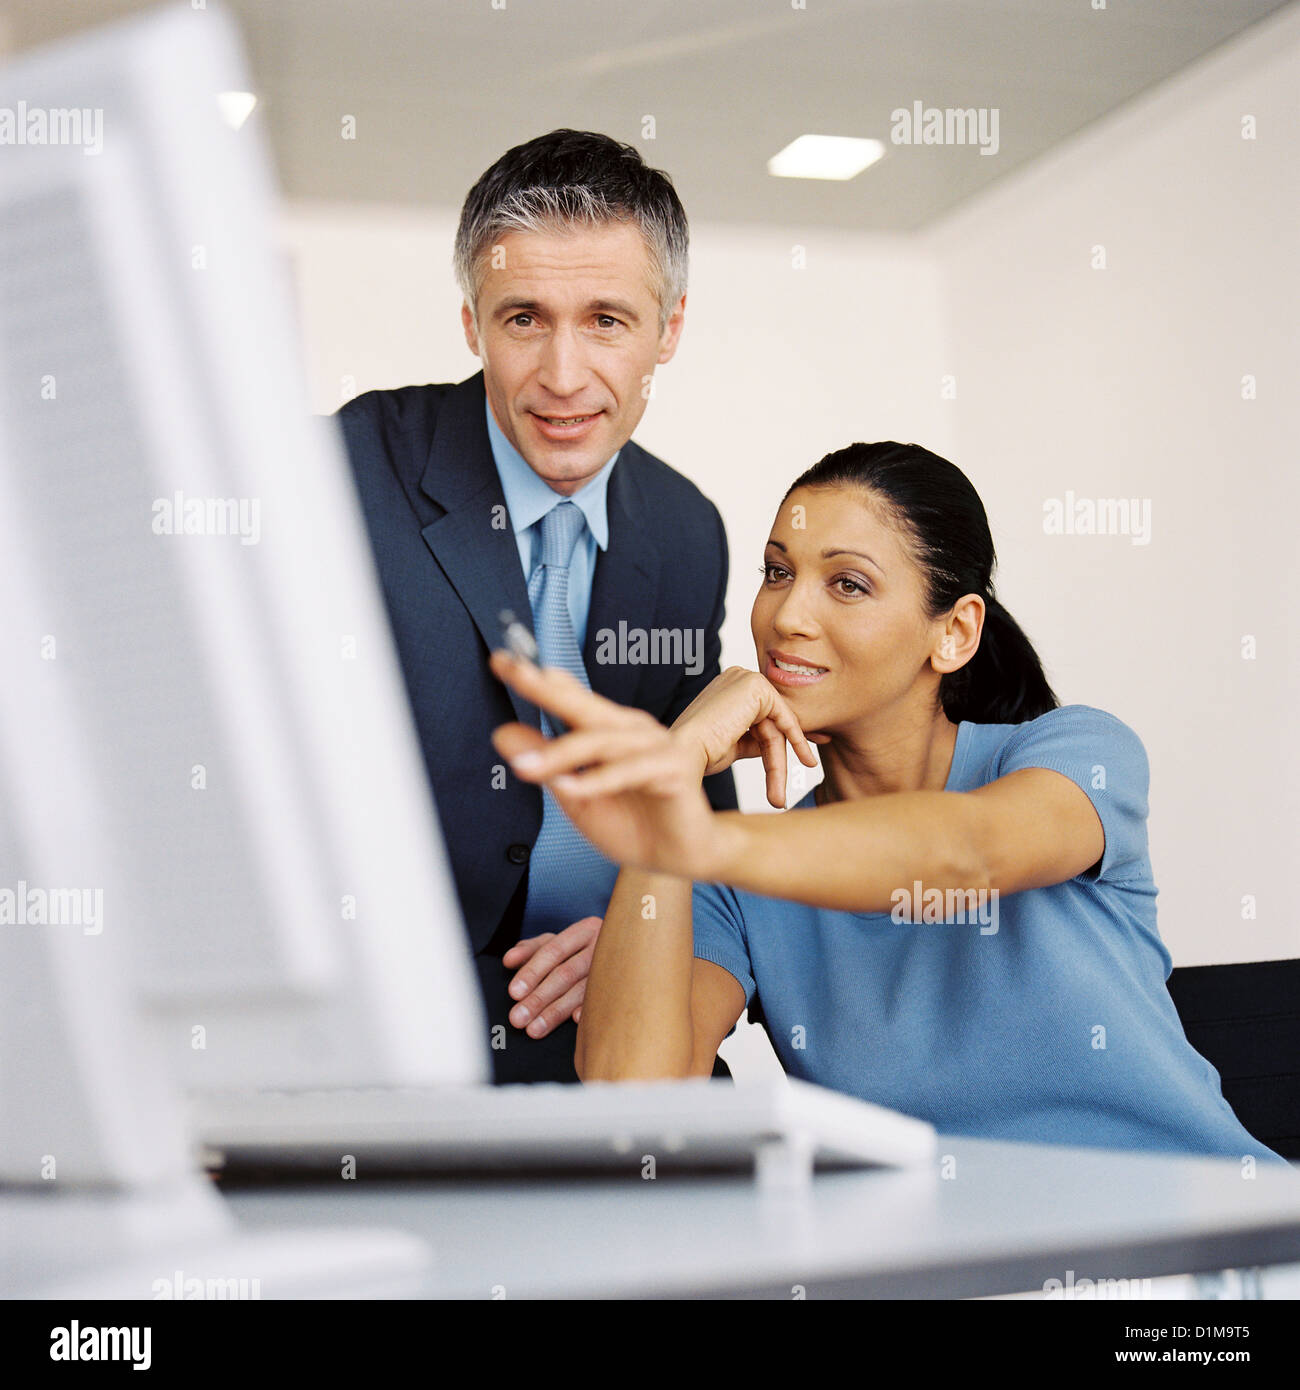 Businessman and businesswoman in office looking at computer smiling License free except ads and billboards Stock Photo